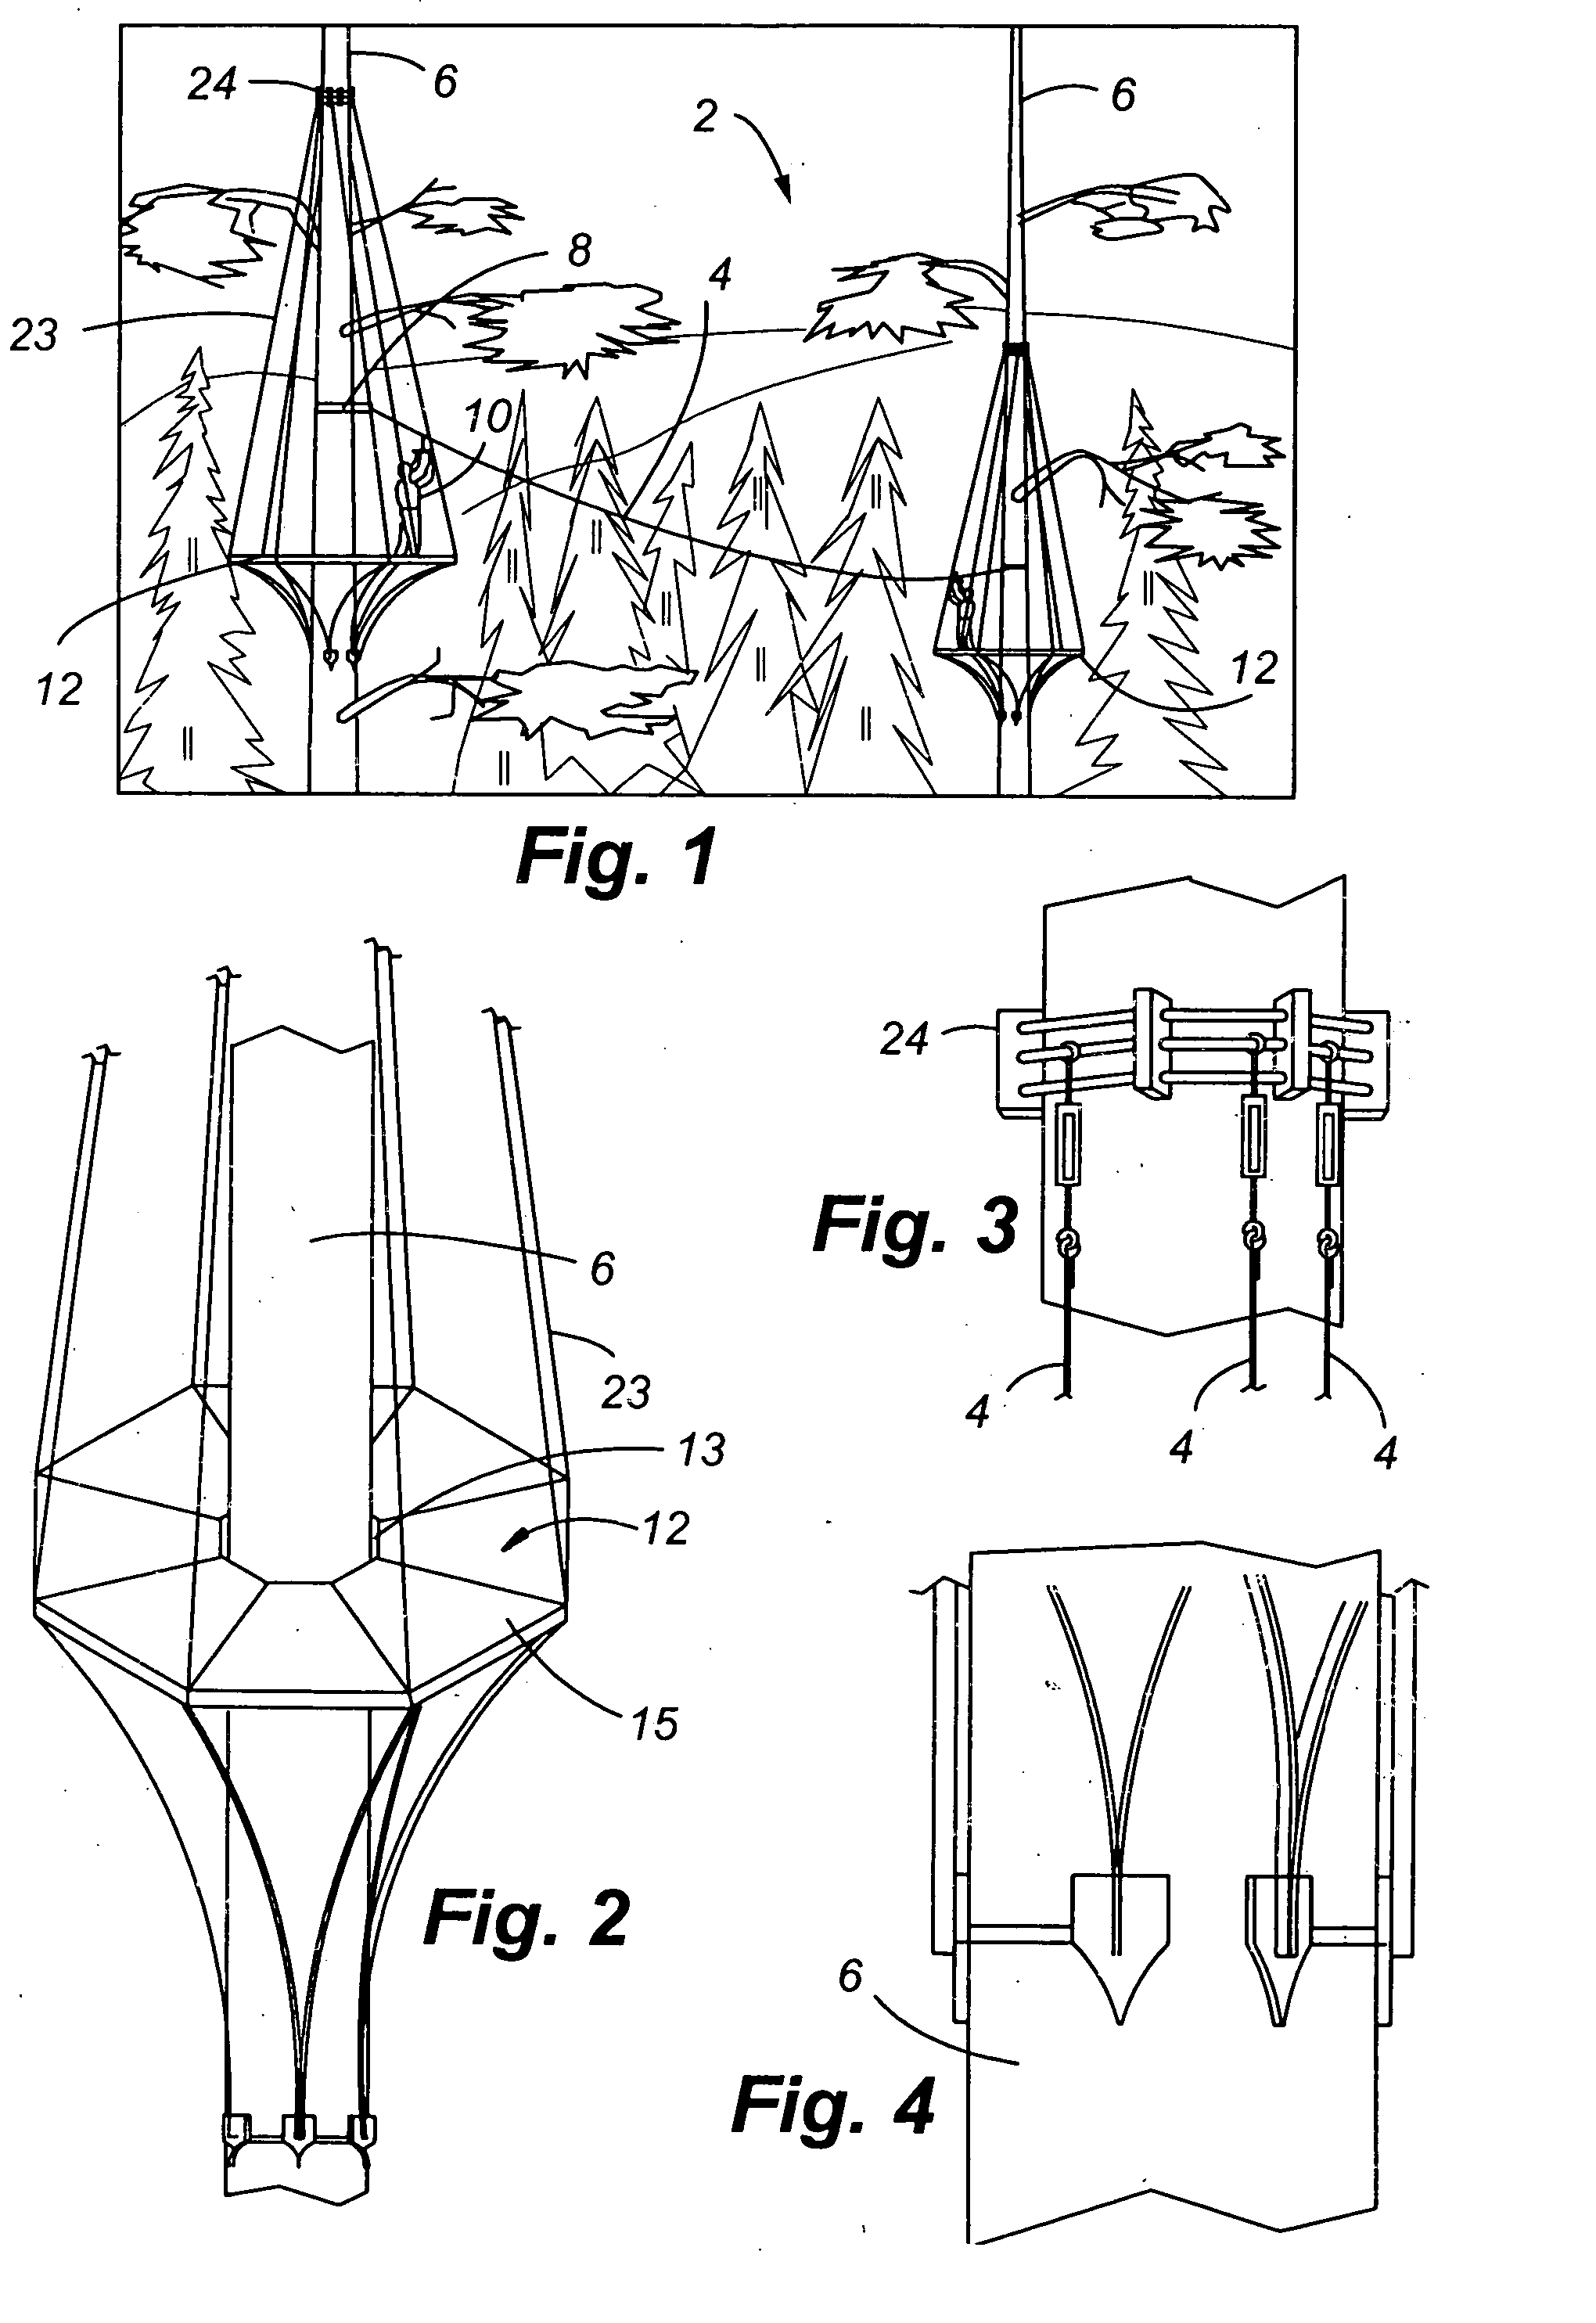 Method and system for transporting a person between a plurality of fixed platforms